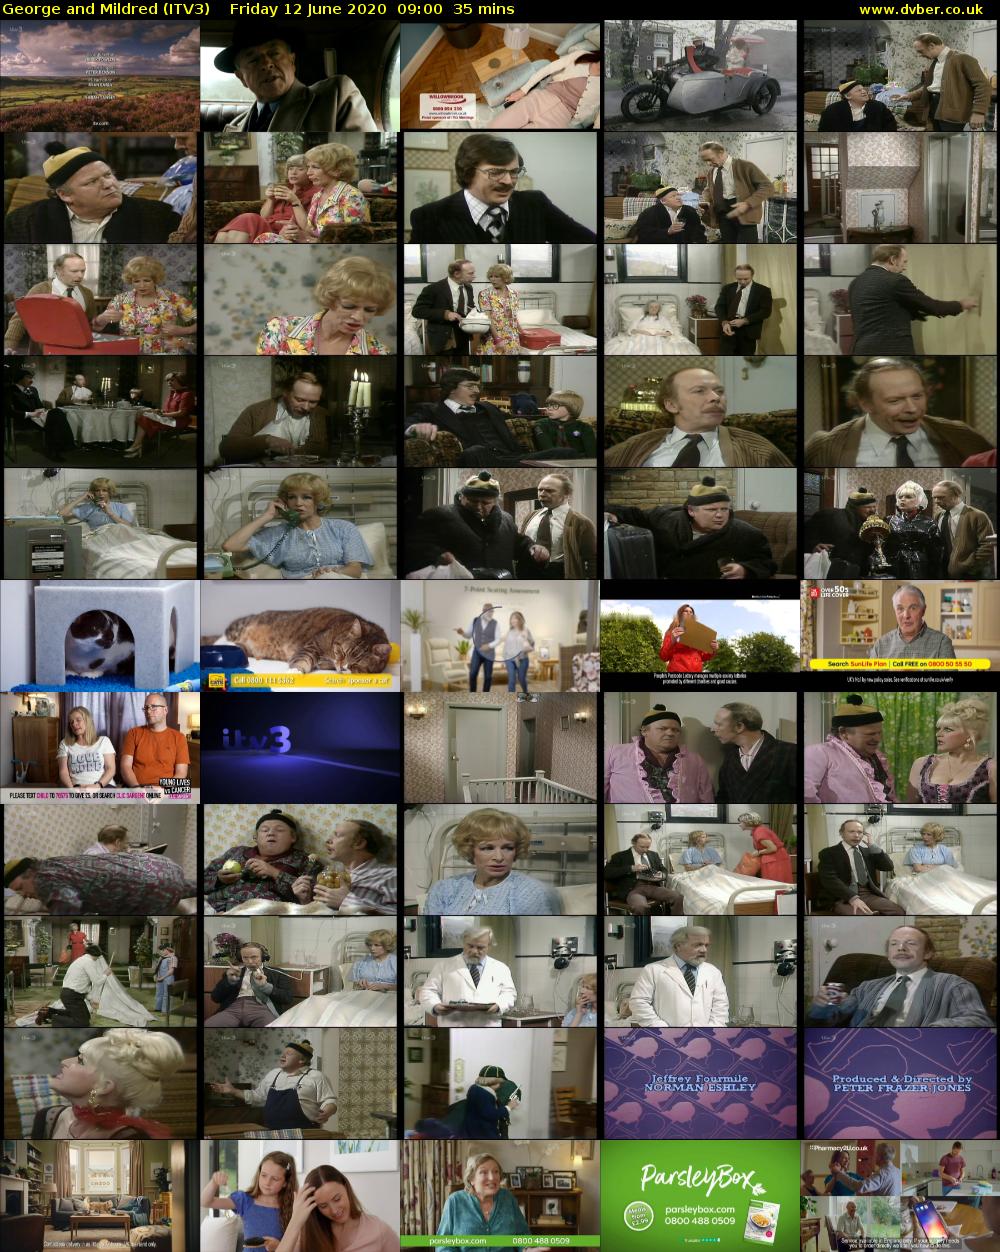 George and Mildred (ITV3) Friday 12 June 2020 09:00 - 09:35